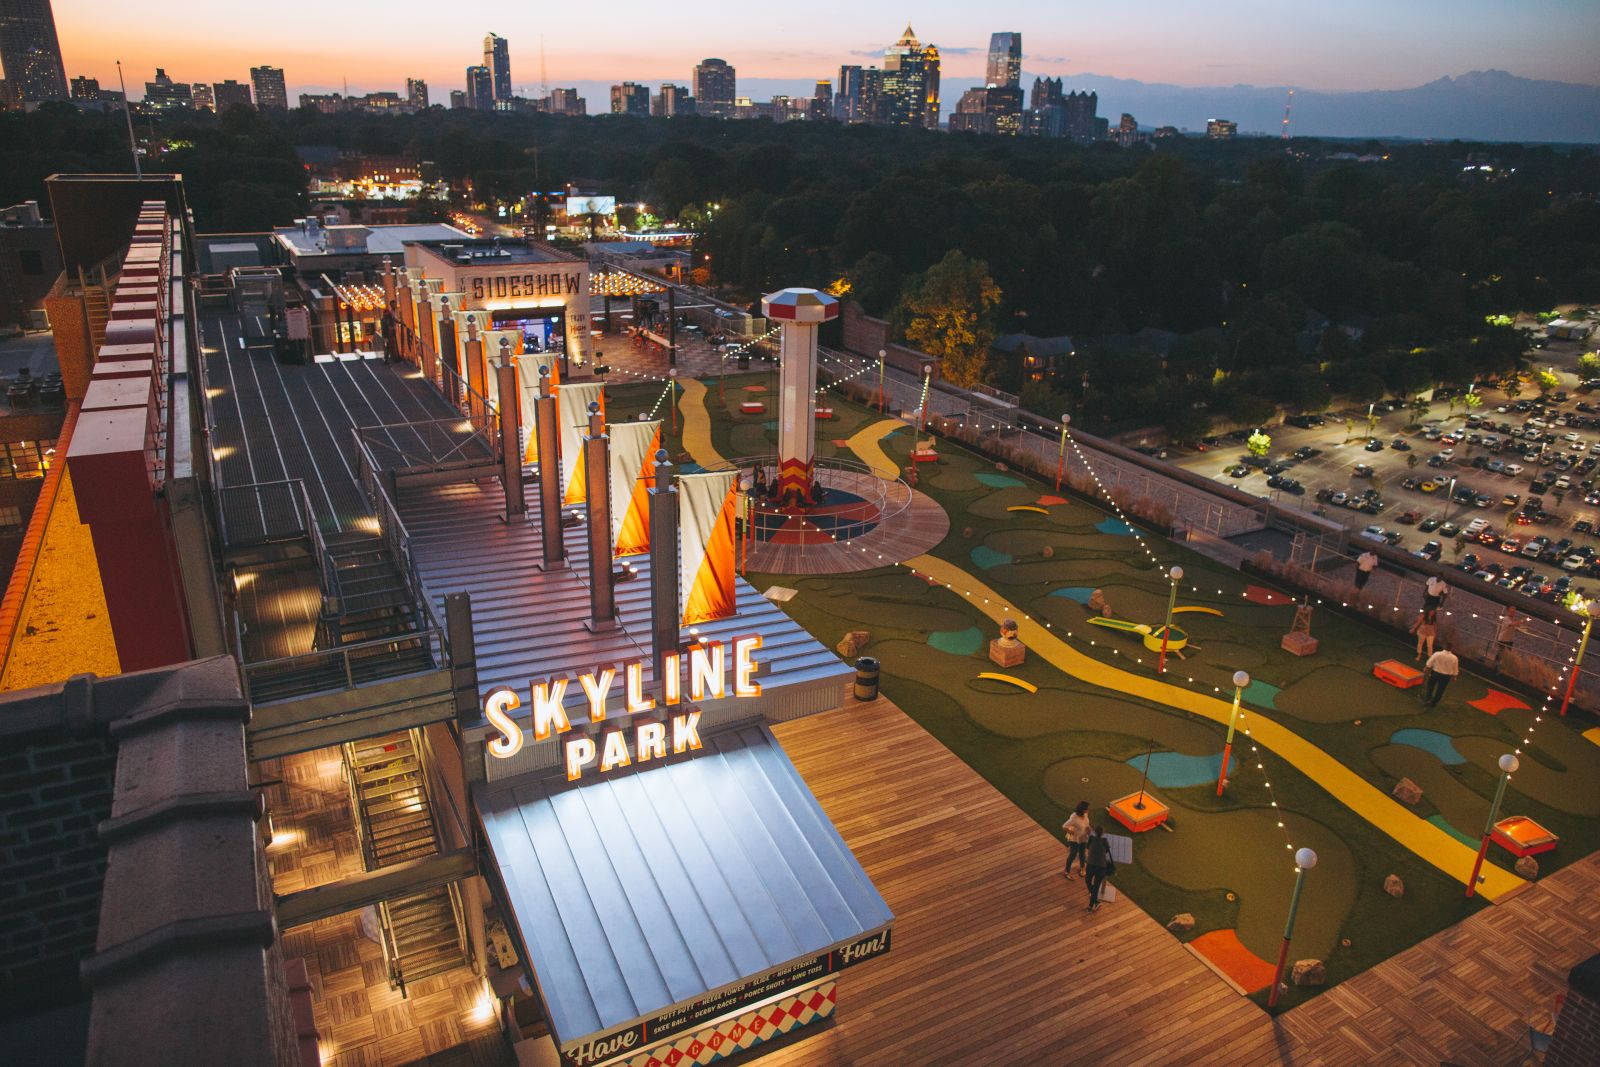 Today's Skyline Park is reminiscent of a former amusement park